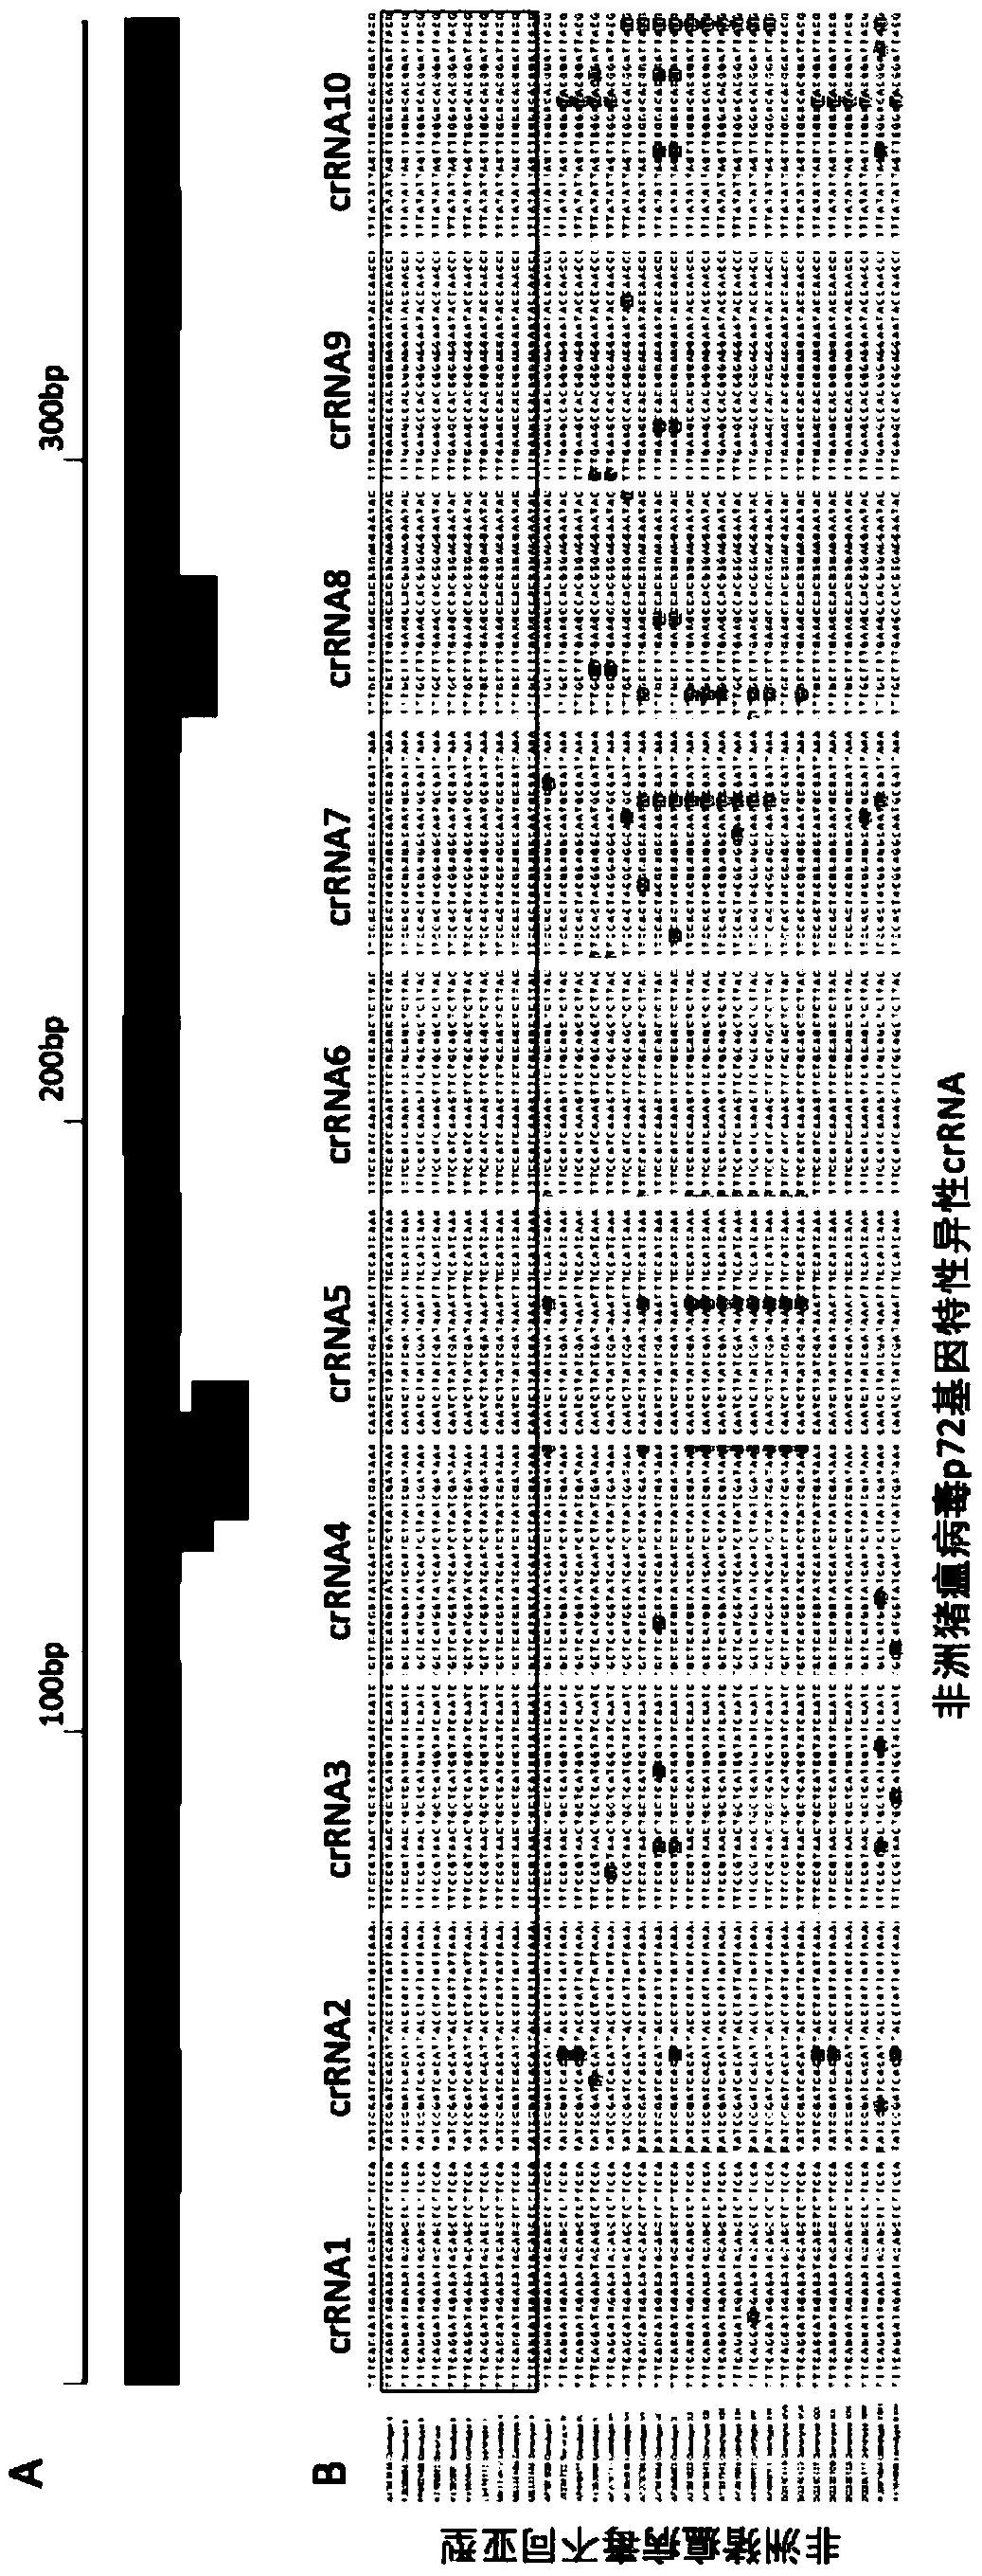 Cpf1 reagent kit and detection method for quickly detecting nucleic acid of African swine fever virus